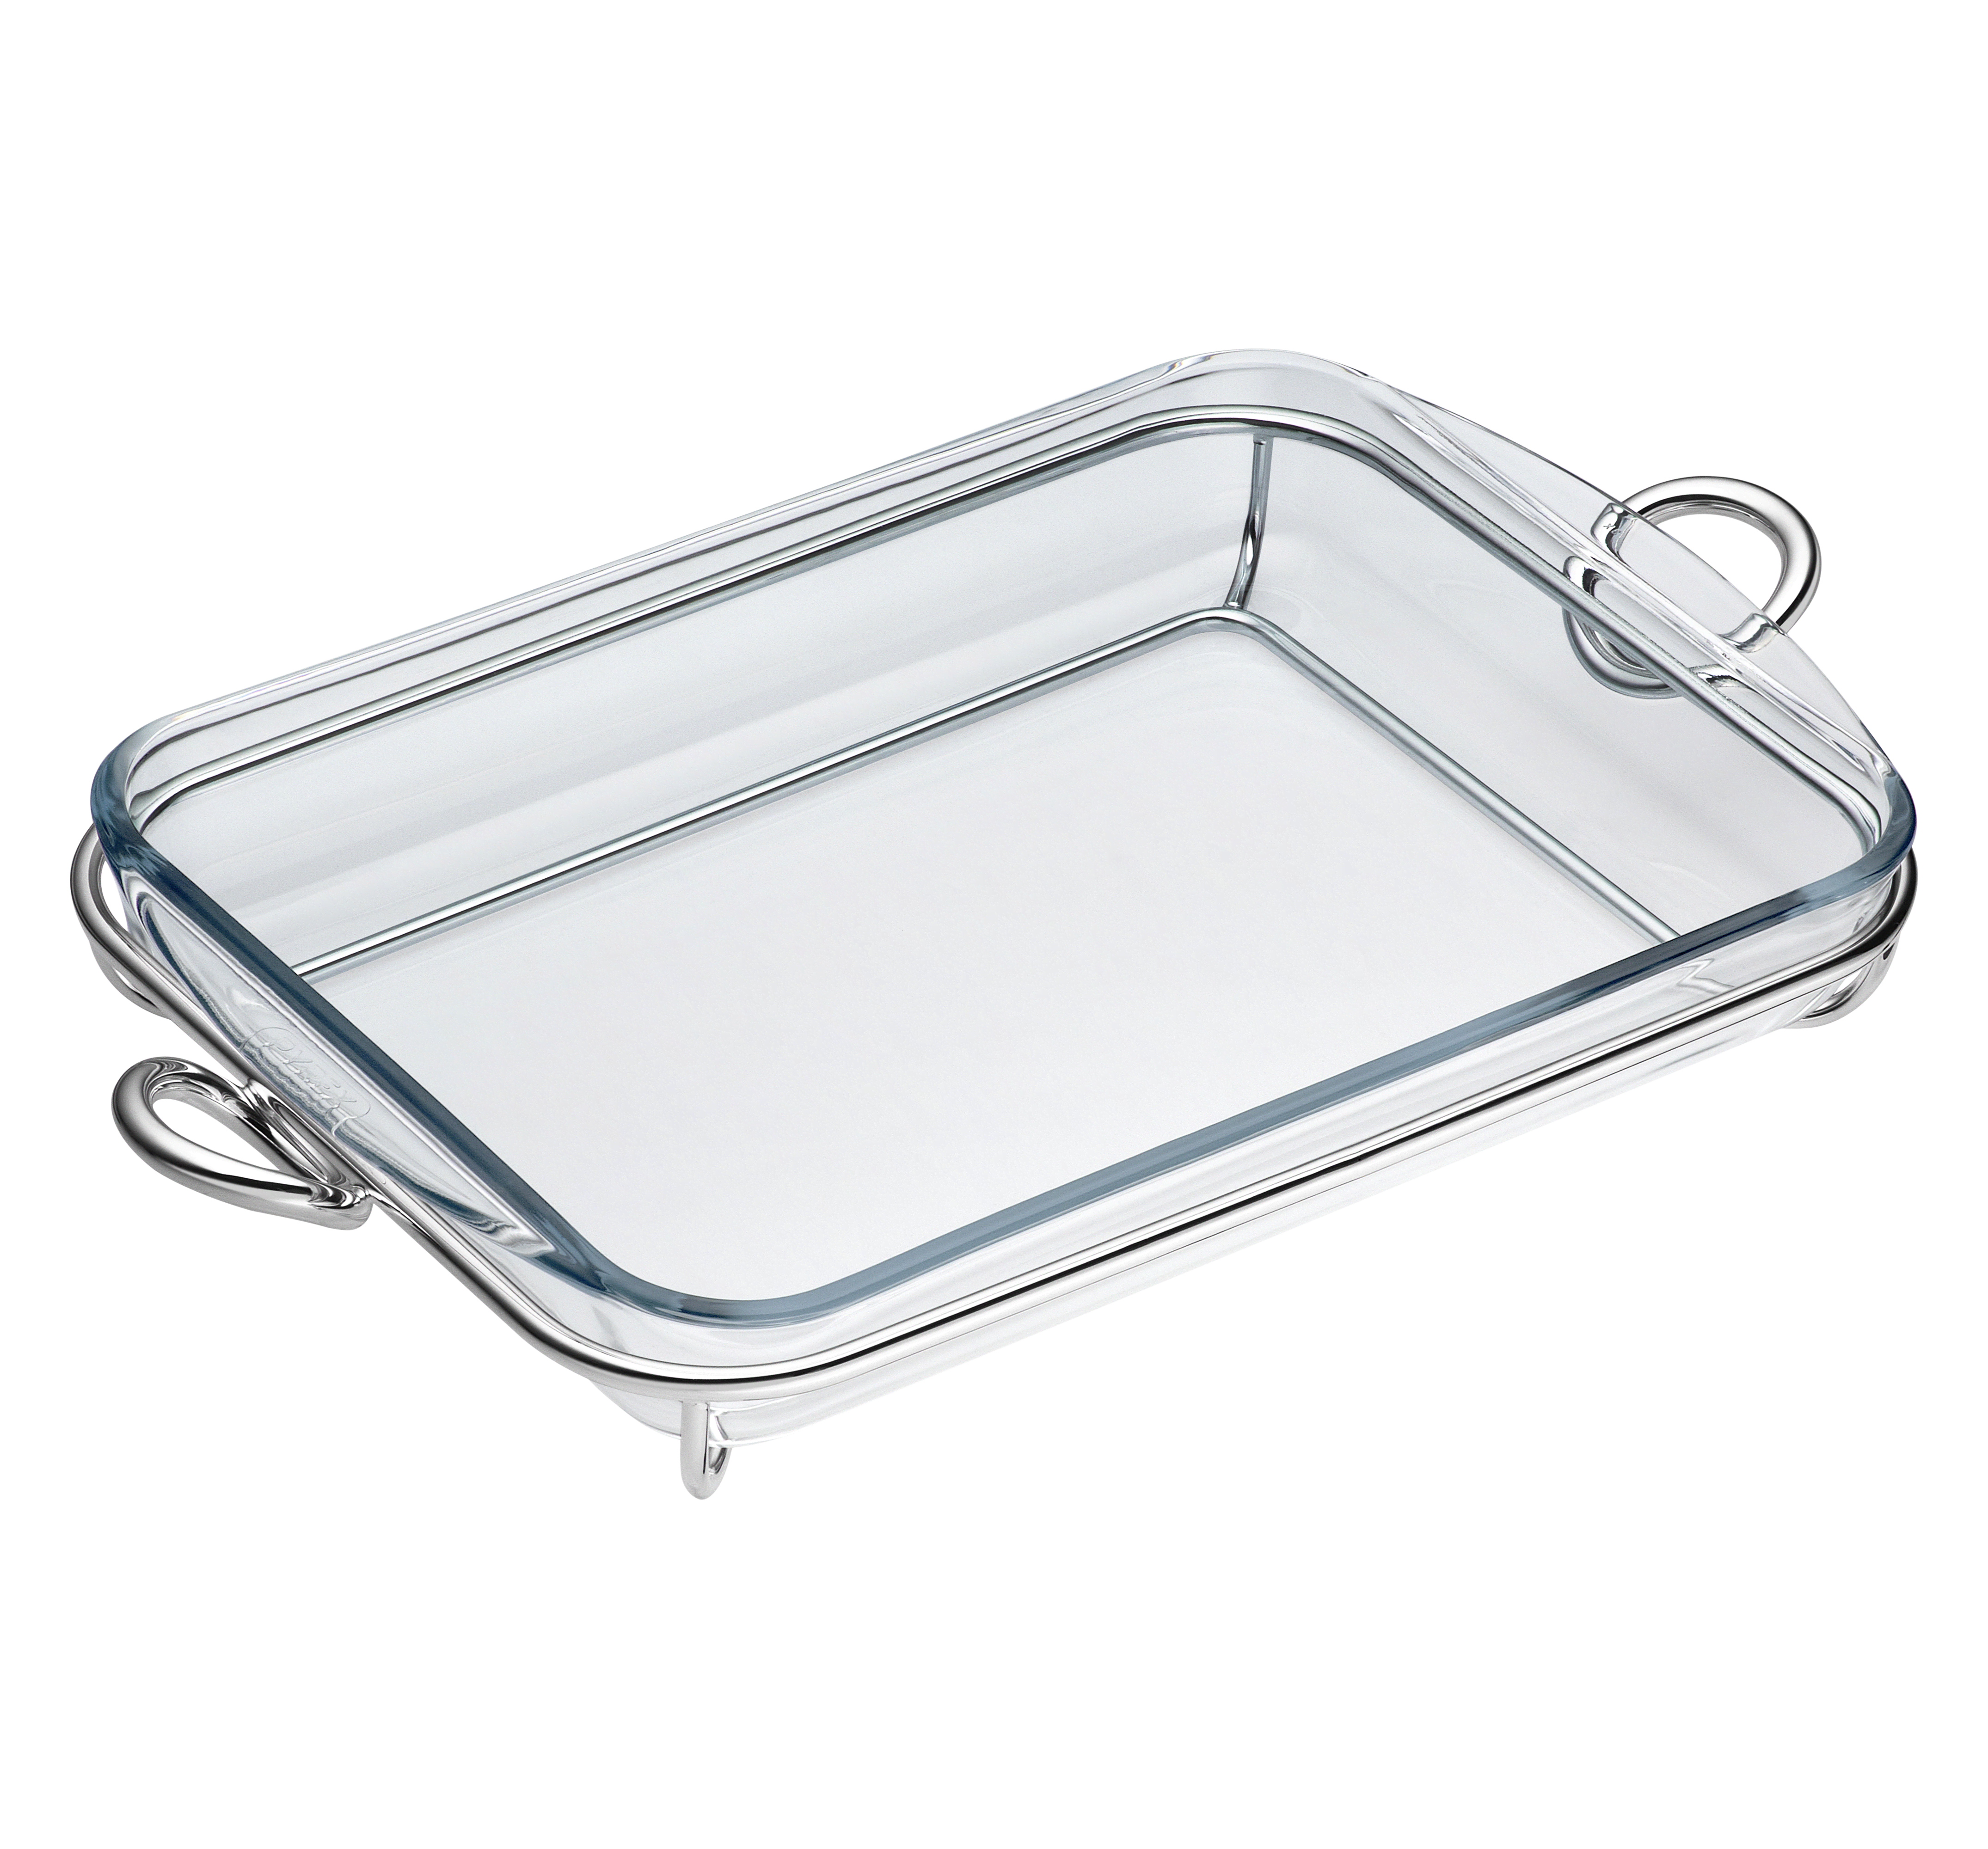 Steel King Stainless Steel Round Tray, 35cm